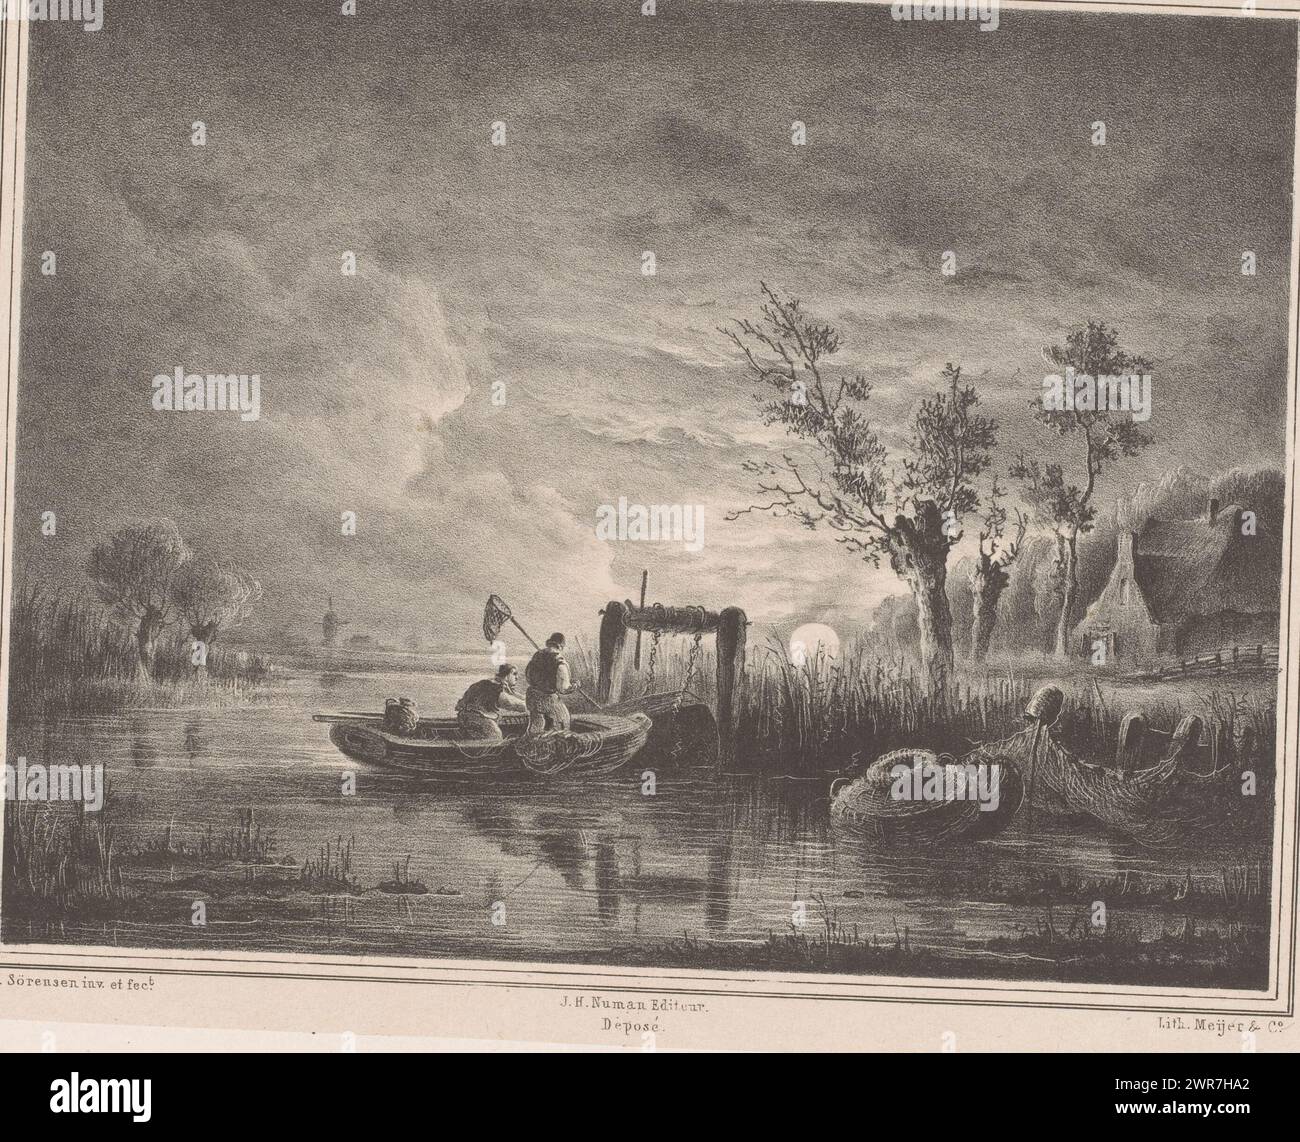 Fishing boat on river by moonlight, Two fishermen in a rowing boat on a river. A house on the right of the quay., print maker: Jacobus Sörensen, after own design by: Jacobus Sörensen, printer: Meyer & Comp., Amsterdam, 1843 - 1856, paper, height 334 mm × width 452 mm, print Stock Photo